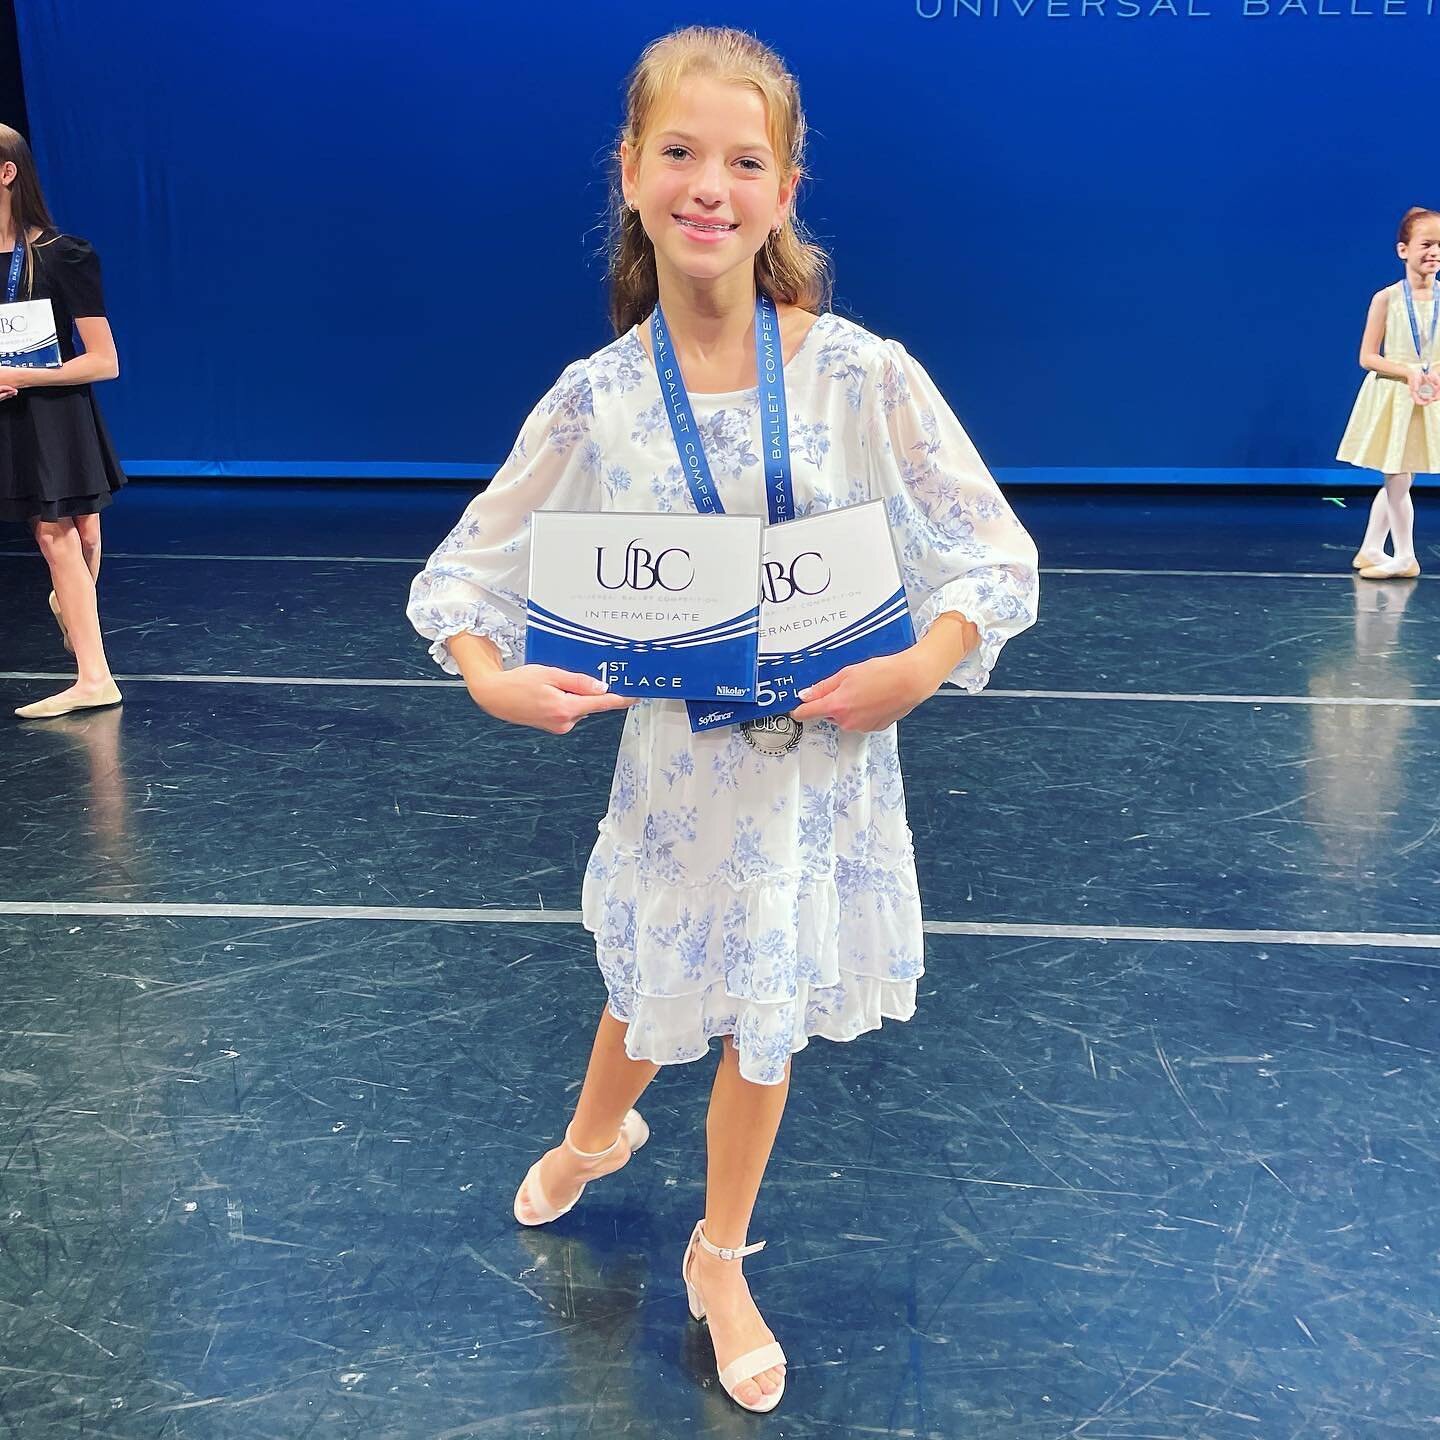 So proud of this 1st place finisher! She received 1st place contemporary and 5th place classical at @universalballetcompetition Next week we&rsquo;ll be in Tampa supporting her at the YAGP finals!! 
We&rsquo;re in constant amazement of her and her si